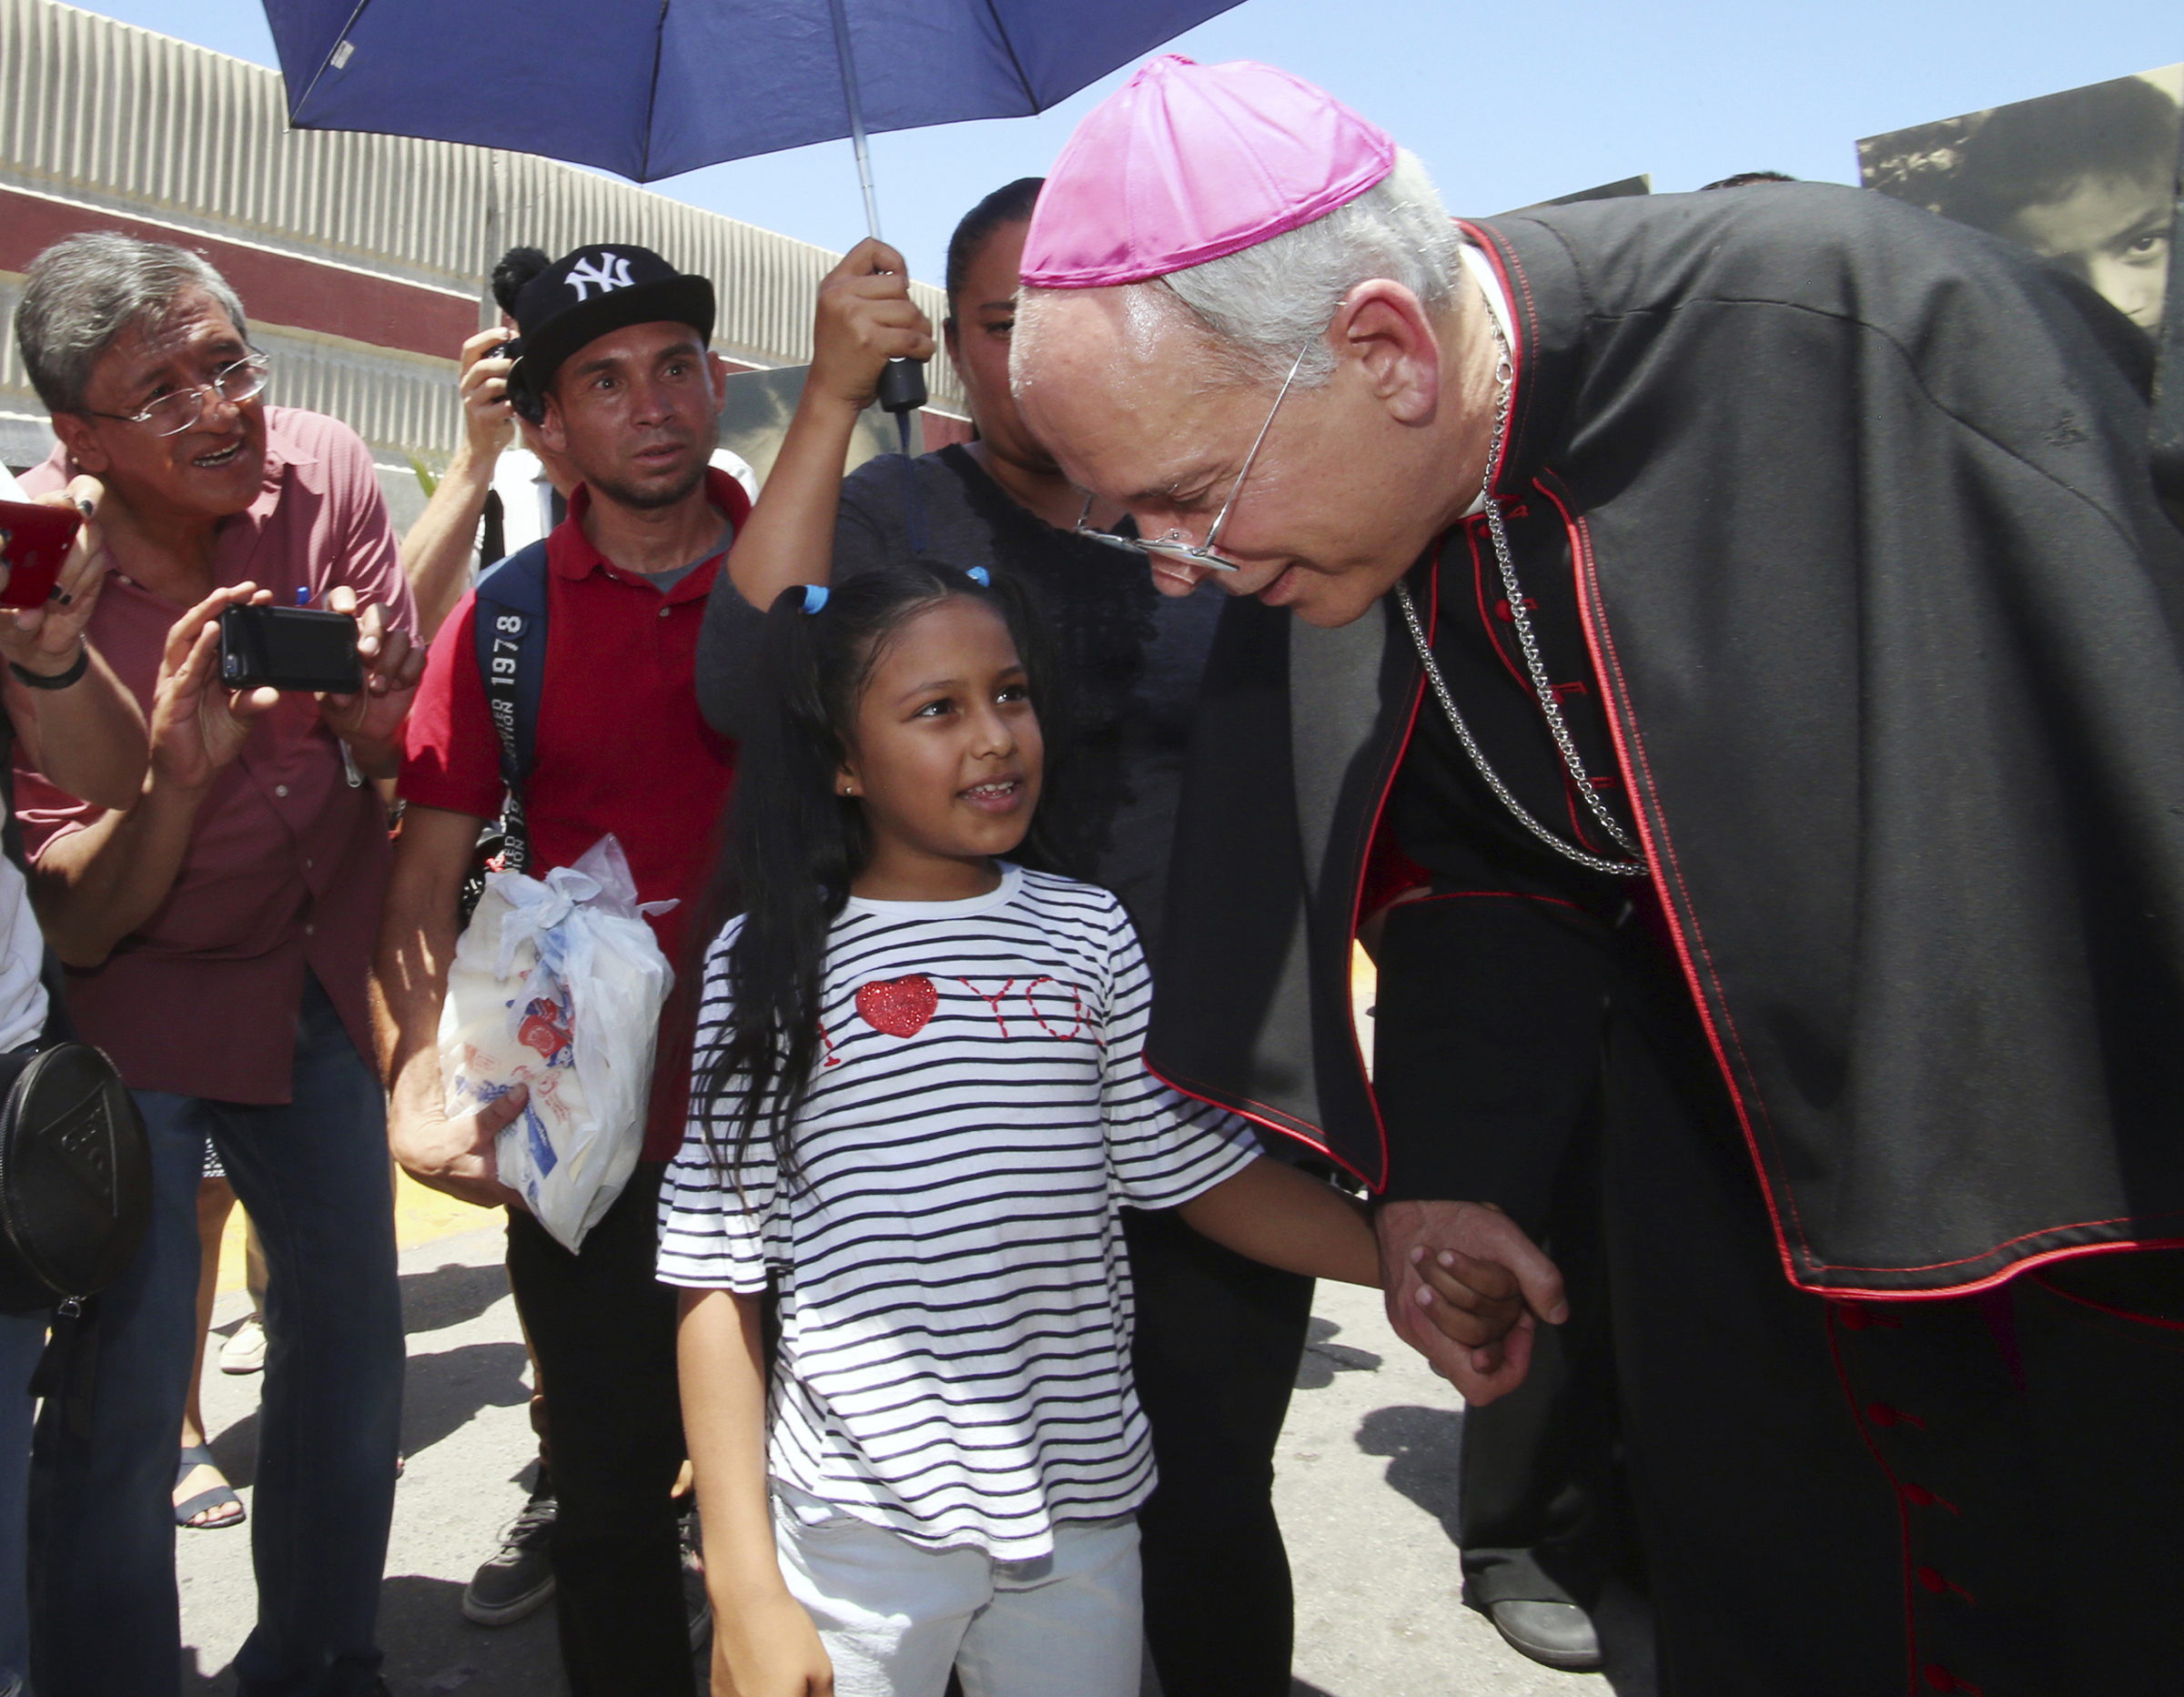 El Paso Catholic Bishop Mark Seitz talks with Celsia Palma, 9, of Honduras, as they walked to the Paso Del Norte International Port of Entry on June, 27, 2019, in Juarez, Mexico. Seitz escorted the girl, her parents and two siblings across the port of entry to U.S. immigration authorities so they could be processed into the U.S. (AP Photo/Rudy Gutierrez)